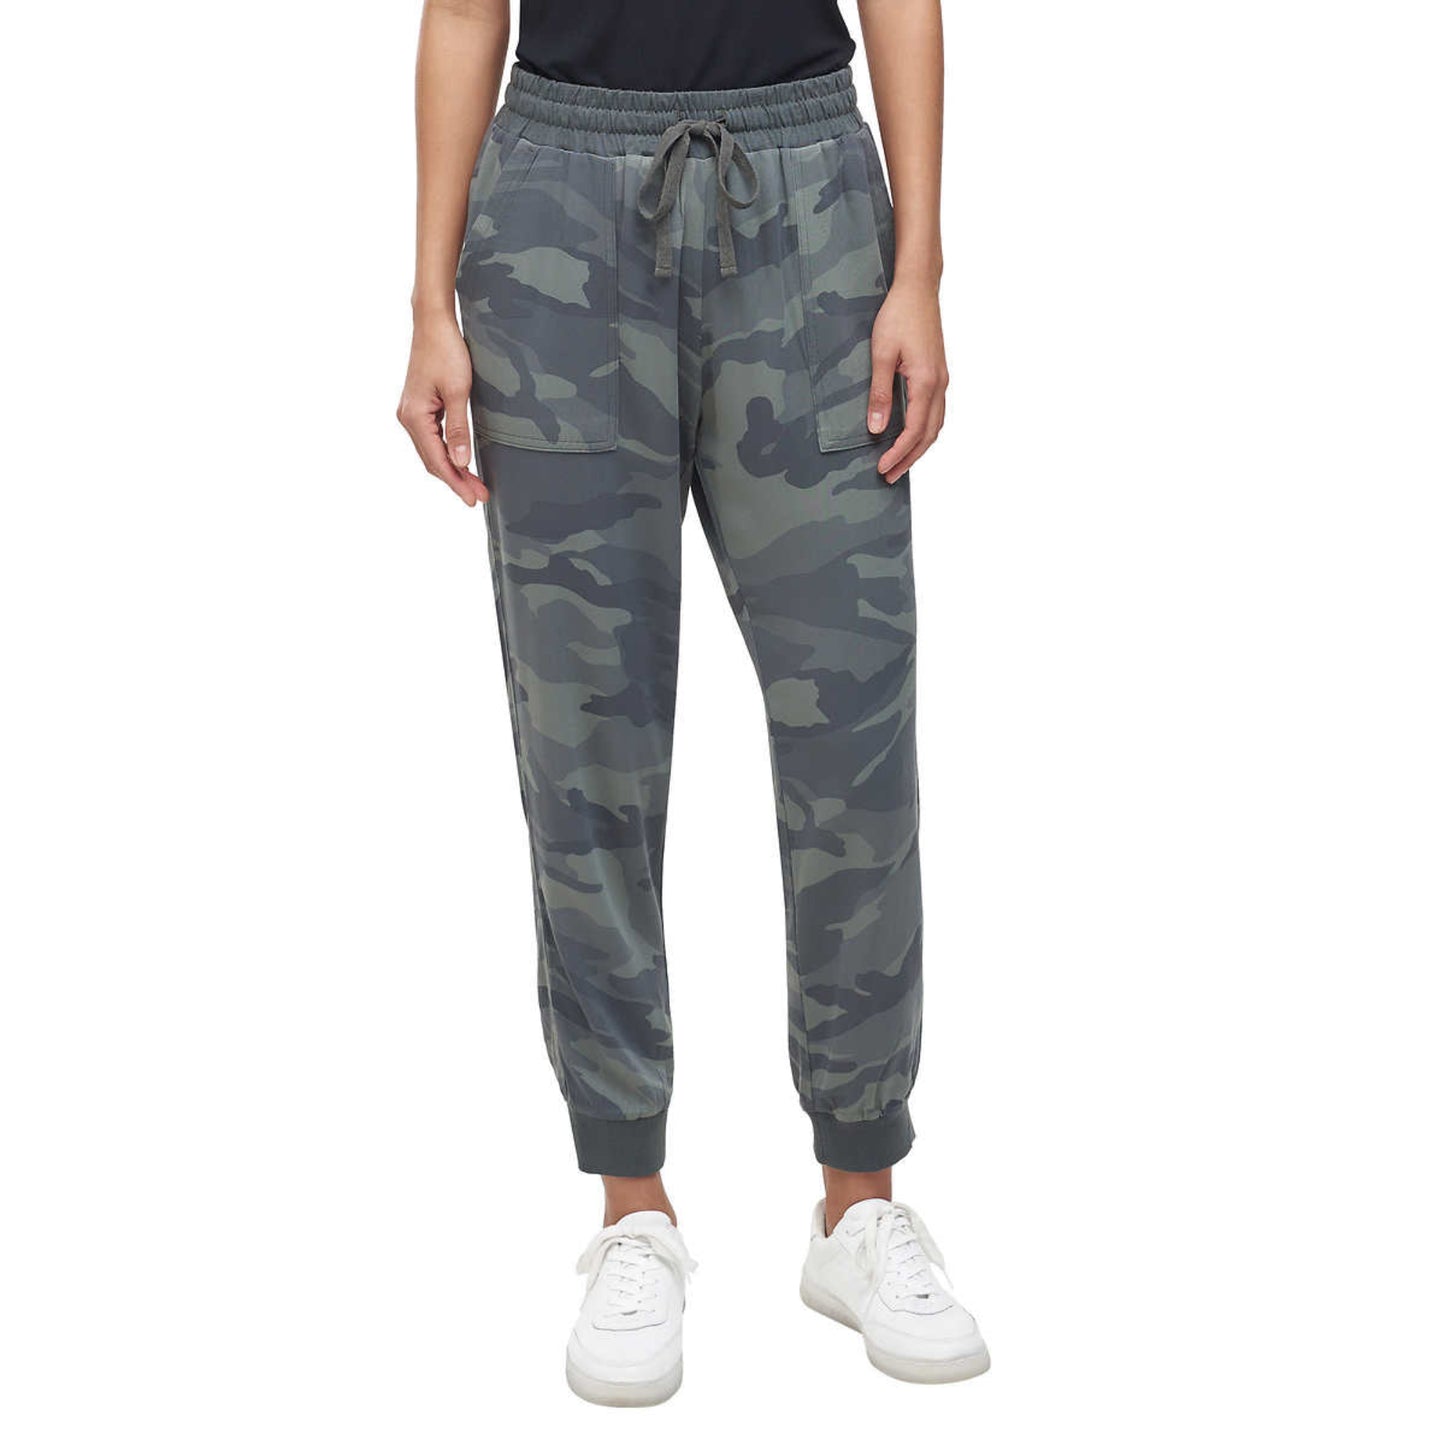 Splendid Women's Ankle Cuff Relaxed Fit Active Pants Camo Print Woven Casual Joggers